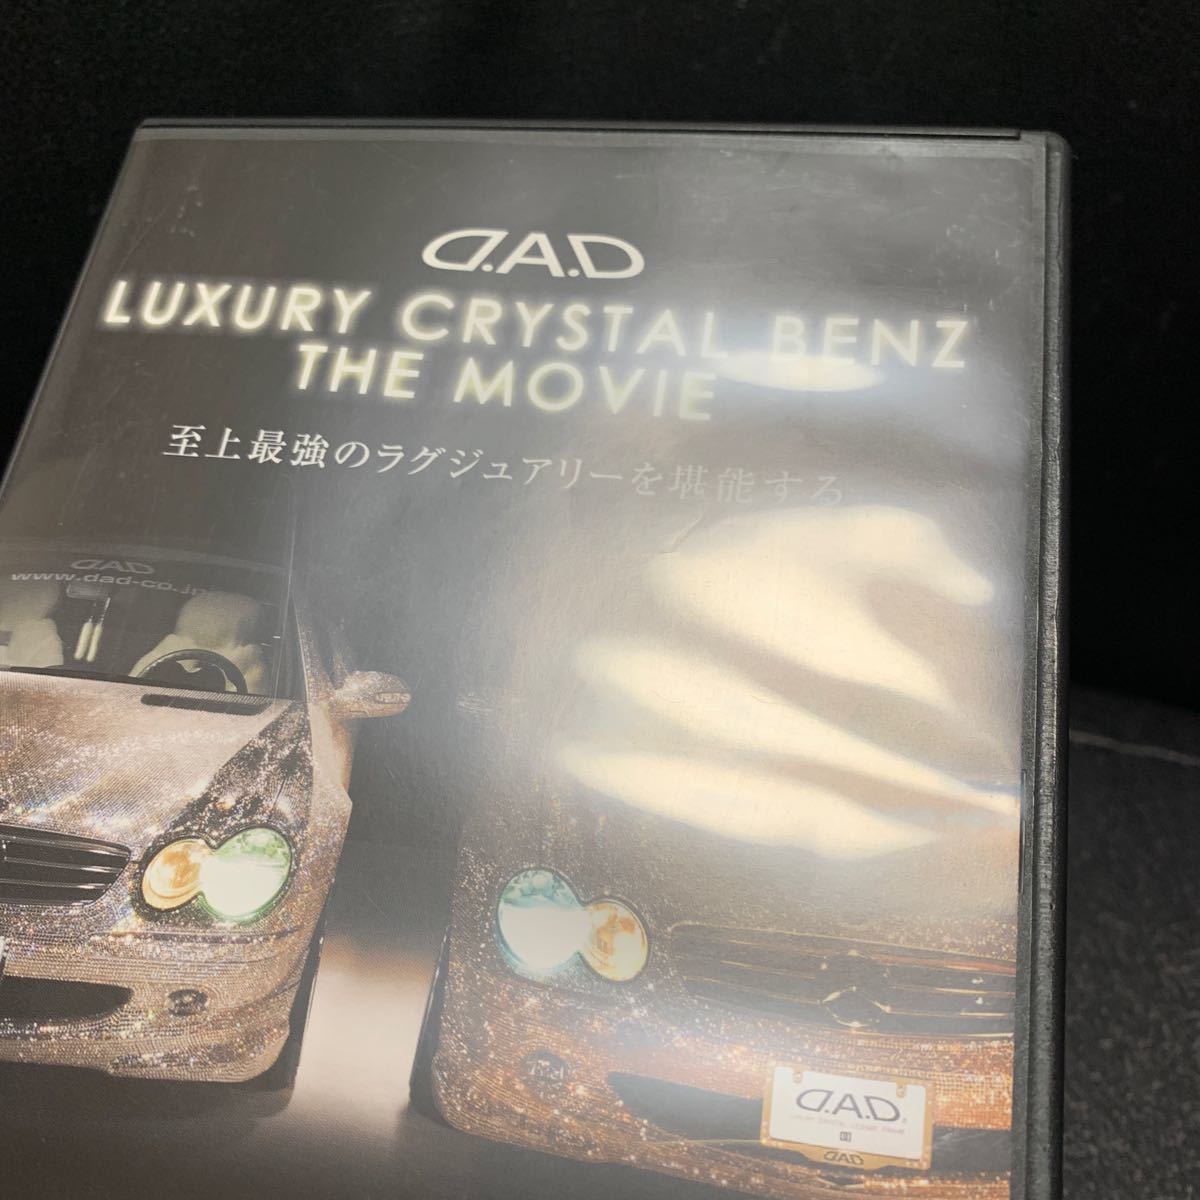 dad ギャルソンＤＶＤ D.A.D LUXURY CRYSTAL BENZ THE MOVIED.A.D ラグジュアリー クリスタルベンツ THE MOVIE （DVD）_画像4